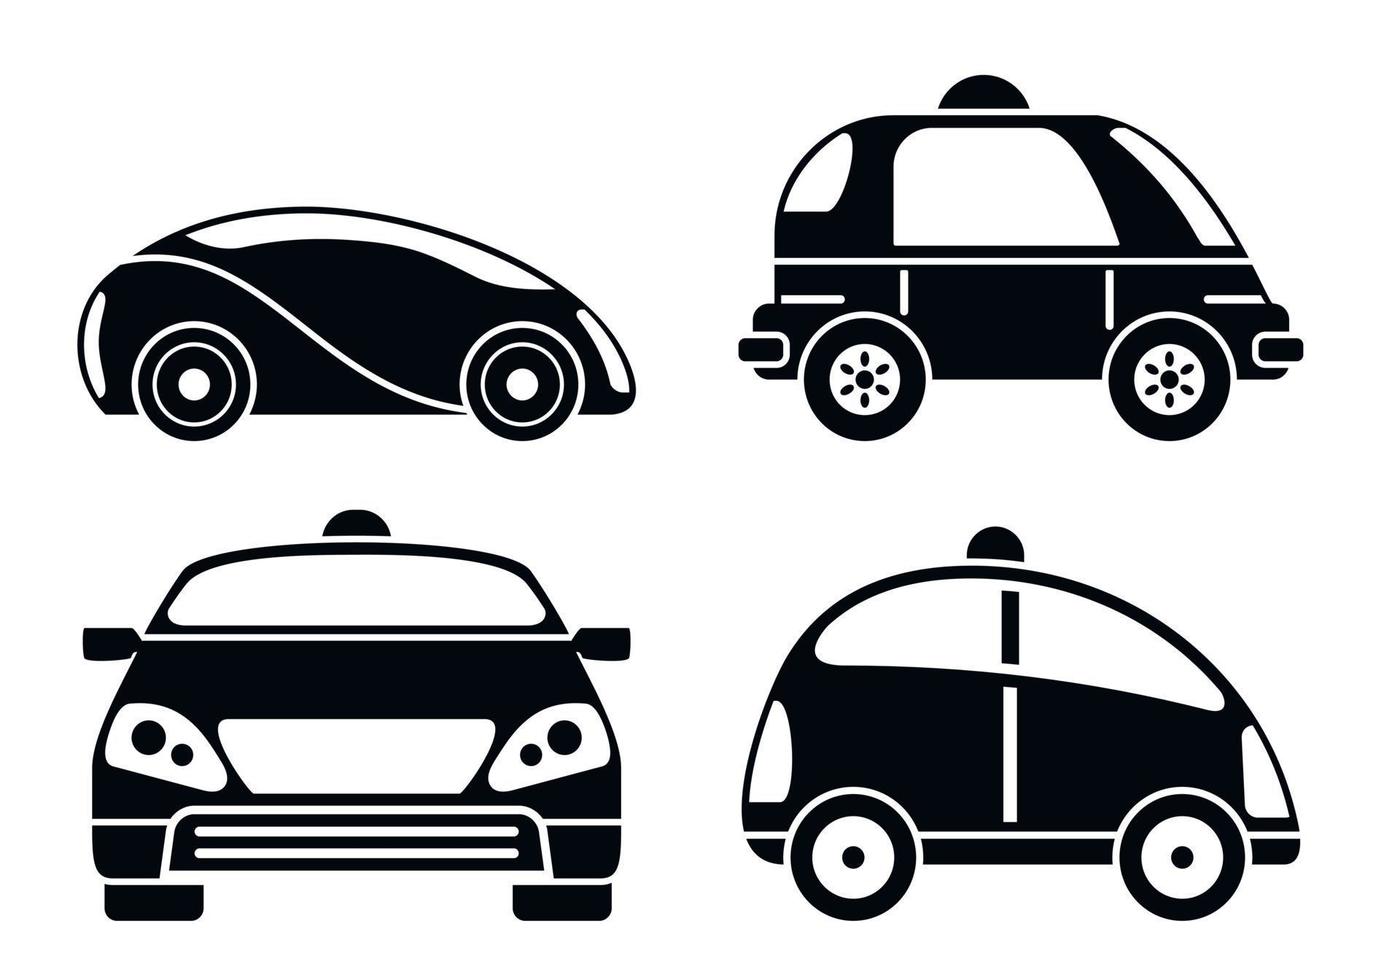 Driverless car icon set, simple style vector